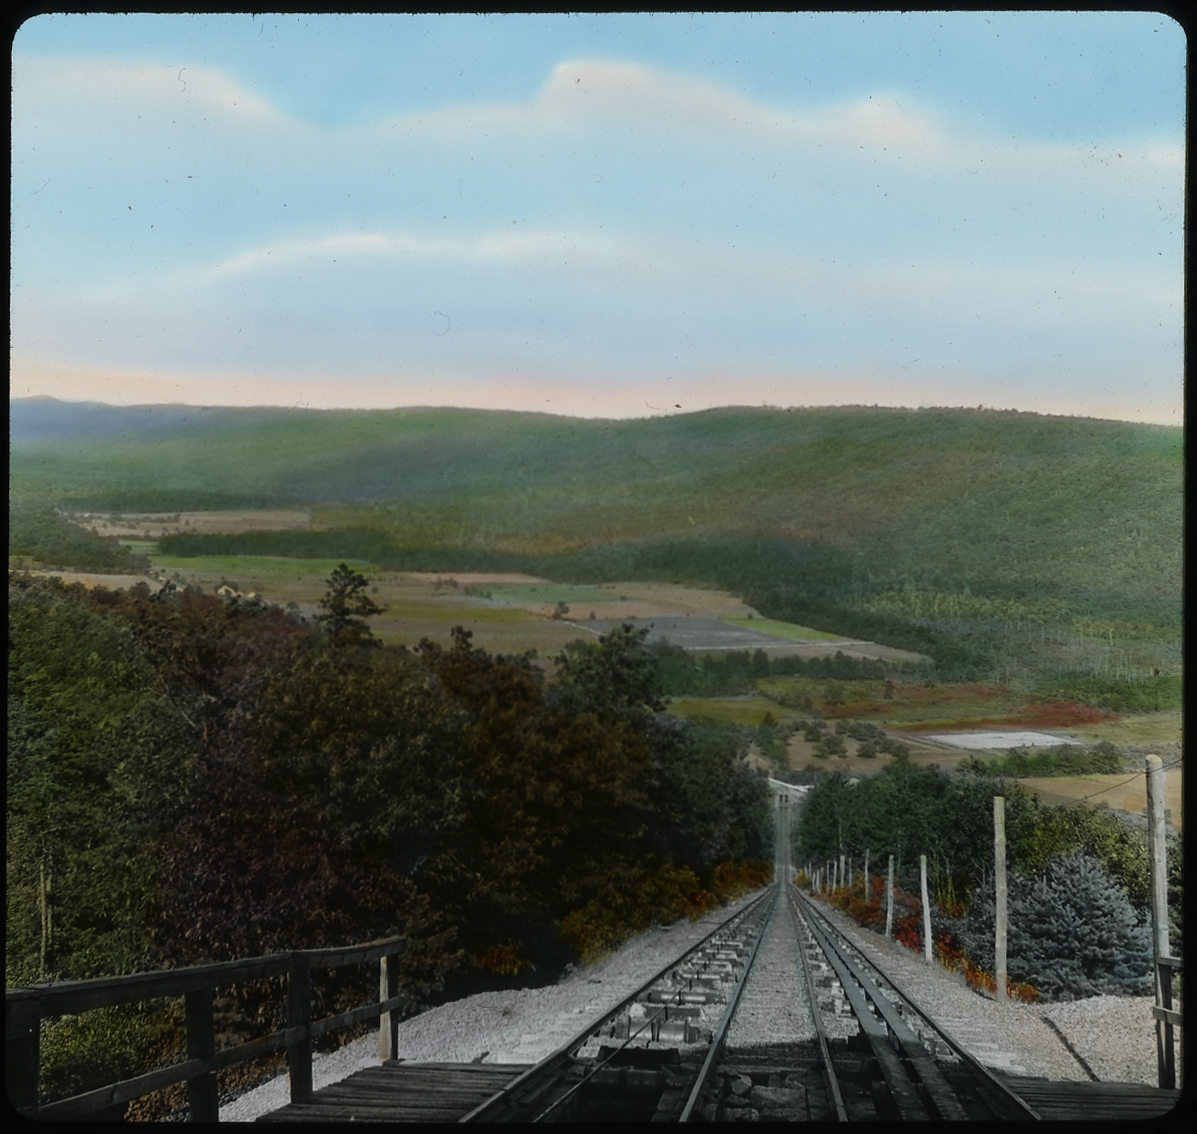 Switchback view of the Mauch Chunk Railway tracks from the top of Jefferson Plane